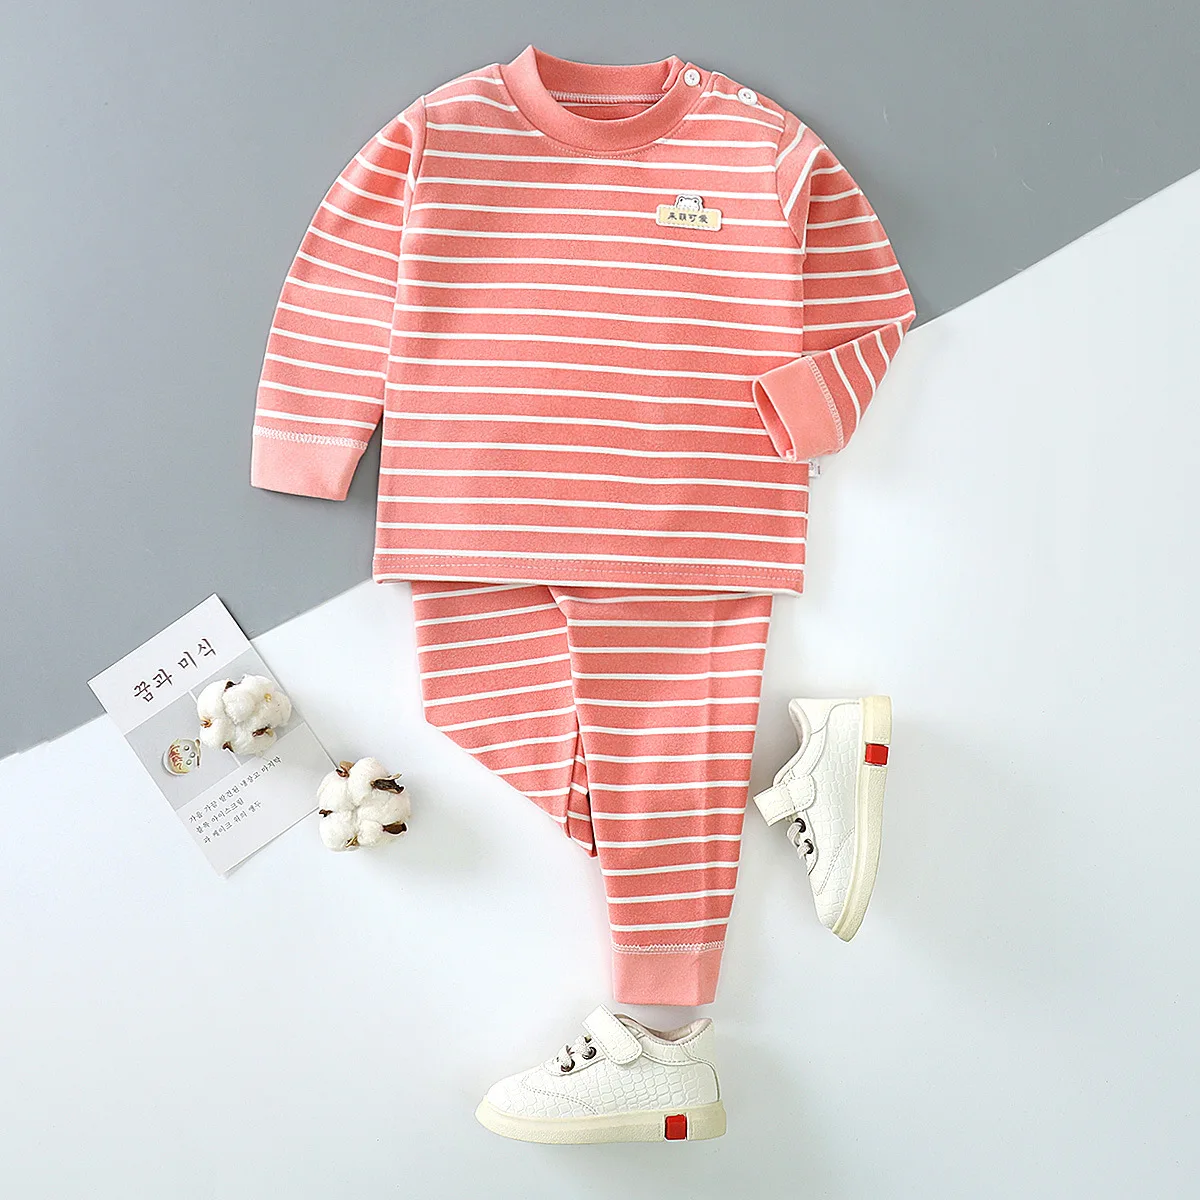 New 2020 Kids Boys Girls Pajama Sets Striped Long Sleeve O-Neck T-Shirt Tops with Pants Toddler Autumn Warm Sleeping Clothes Set